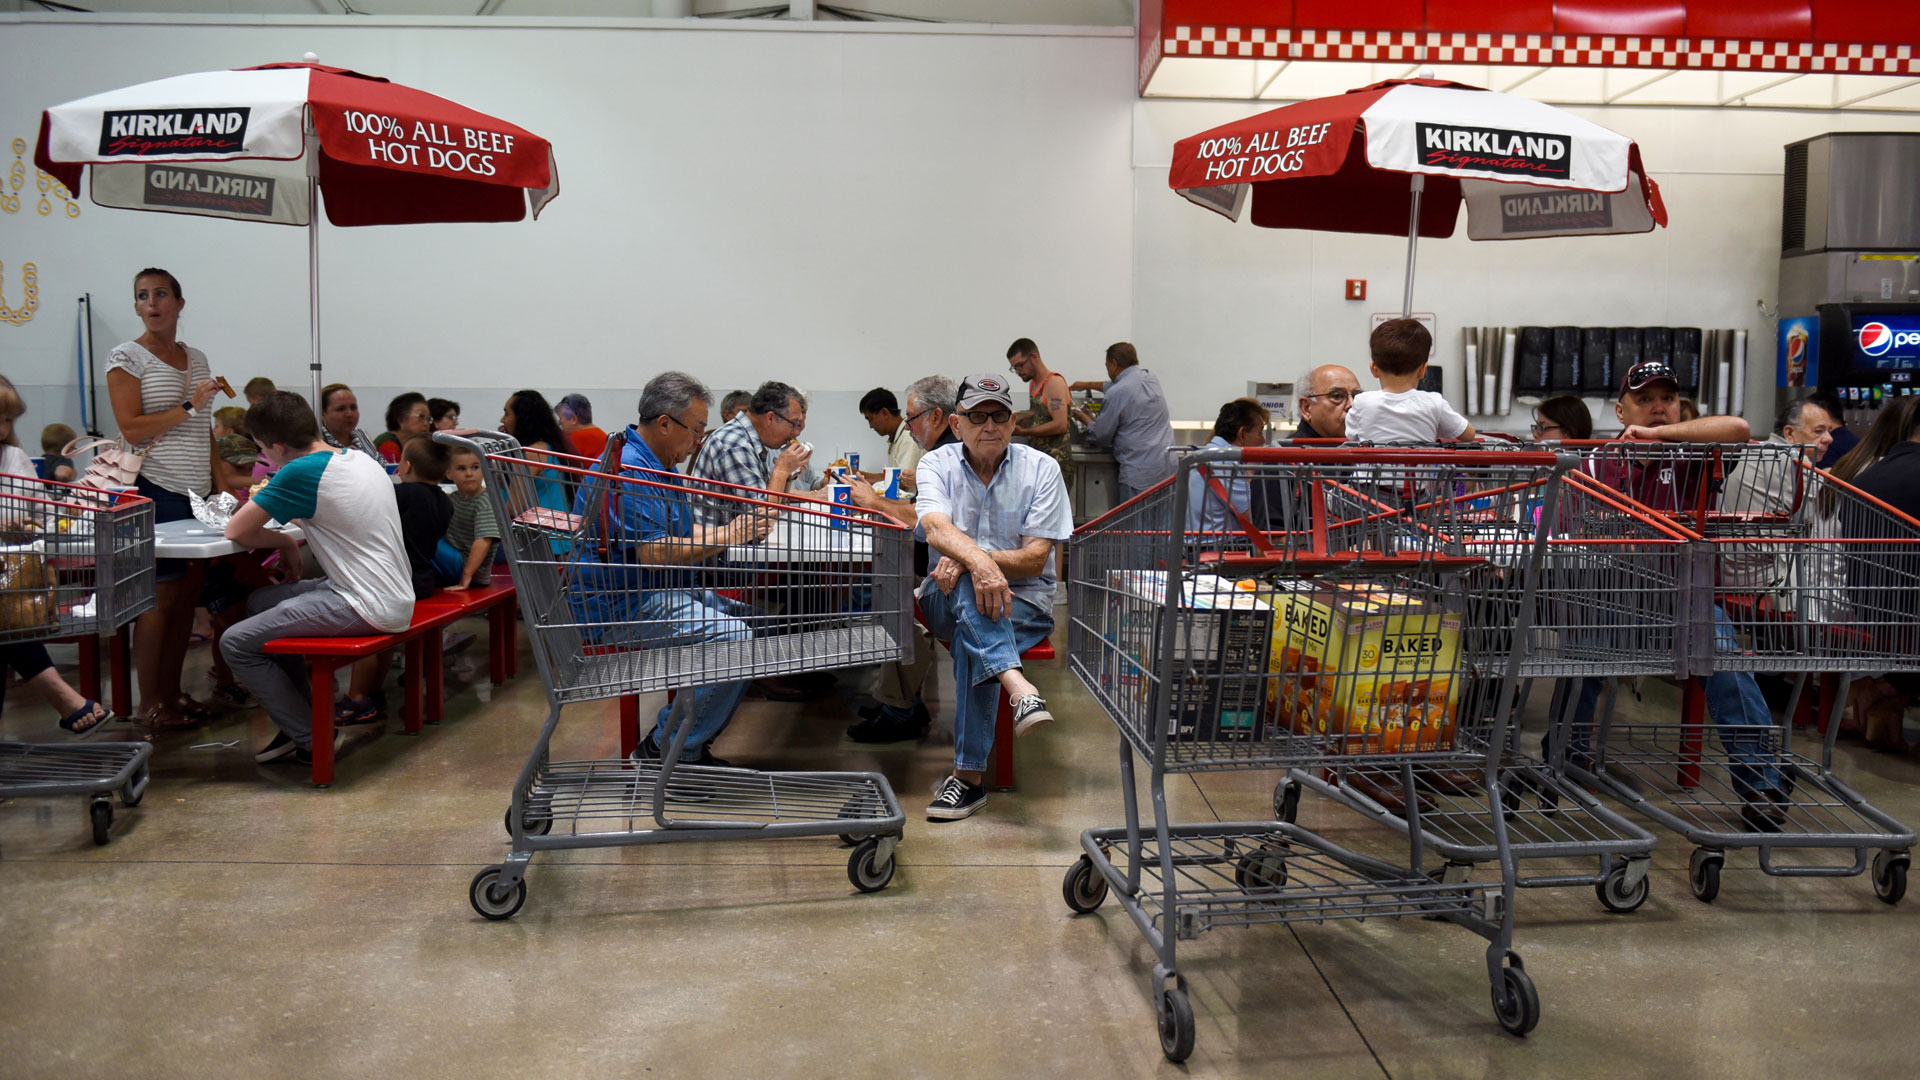 Just keep stomping us into the ground cry Costco shoppers facing food court change for first time under new policy [Video]